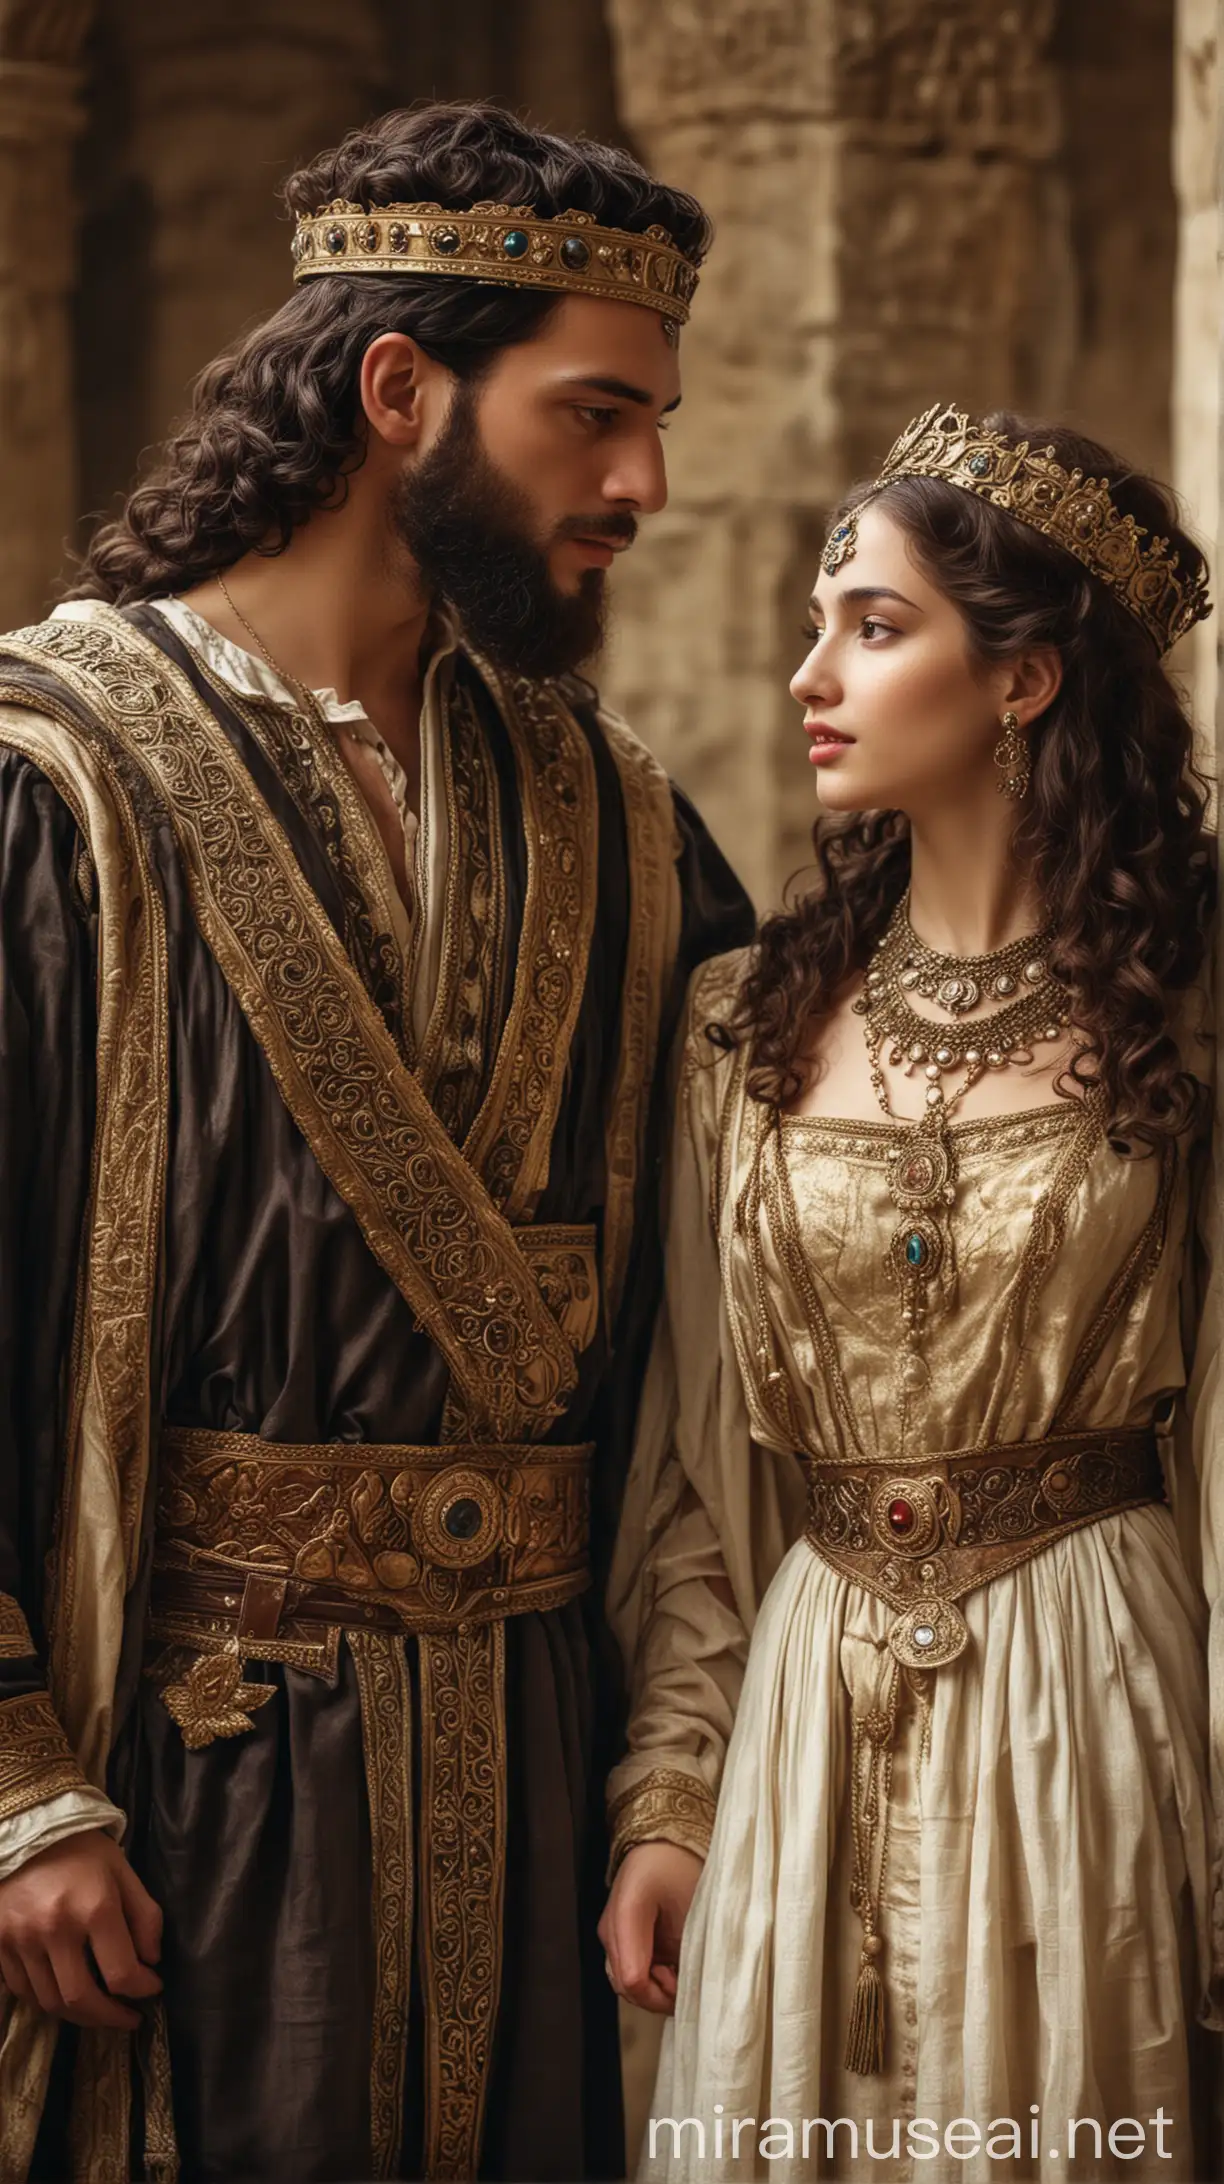 Royal Jewish King and Noble Lady in Ancient Times